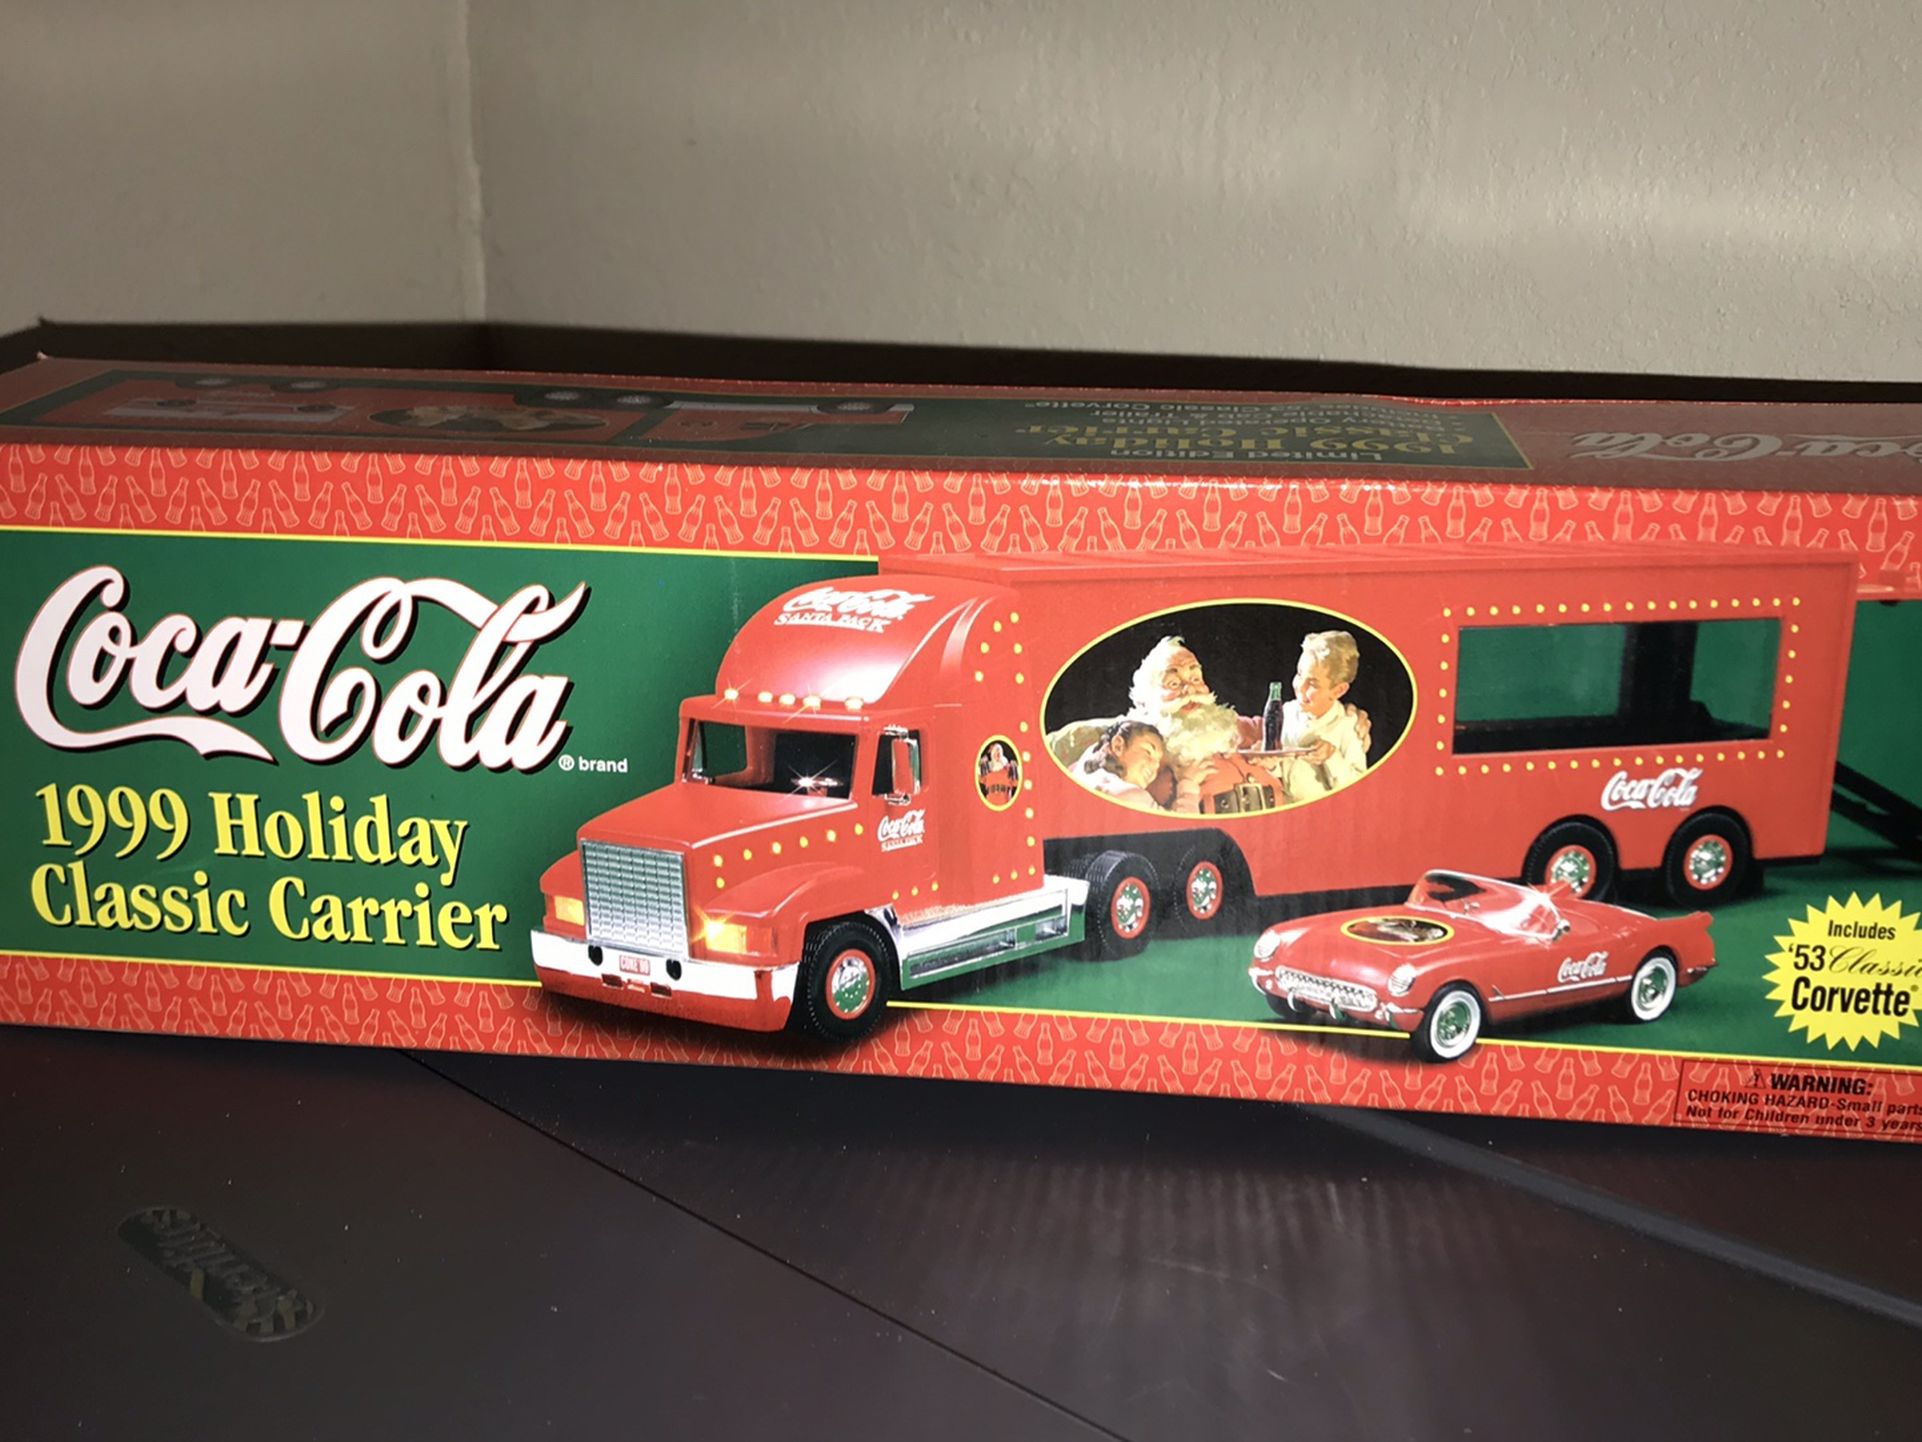 Coca Cola 1999 holiday classic carrier